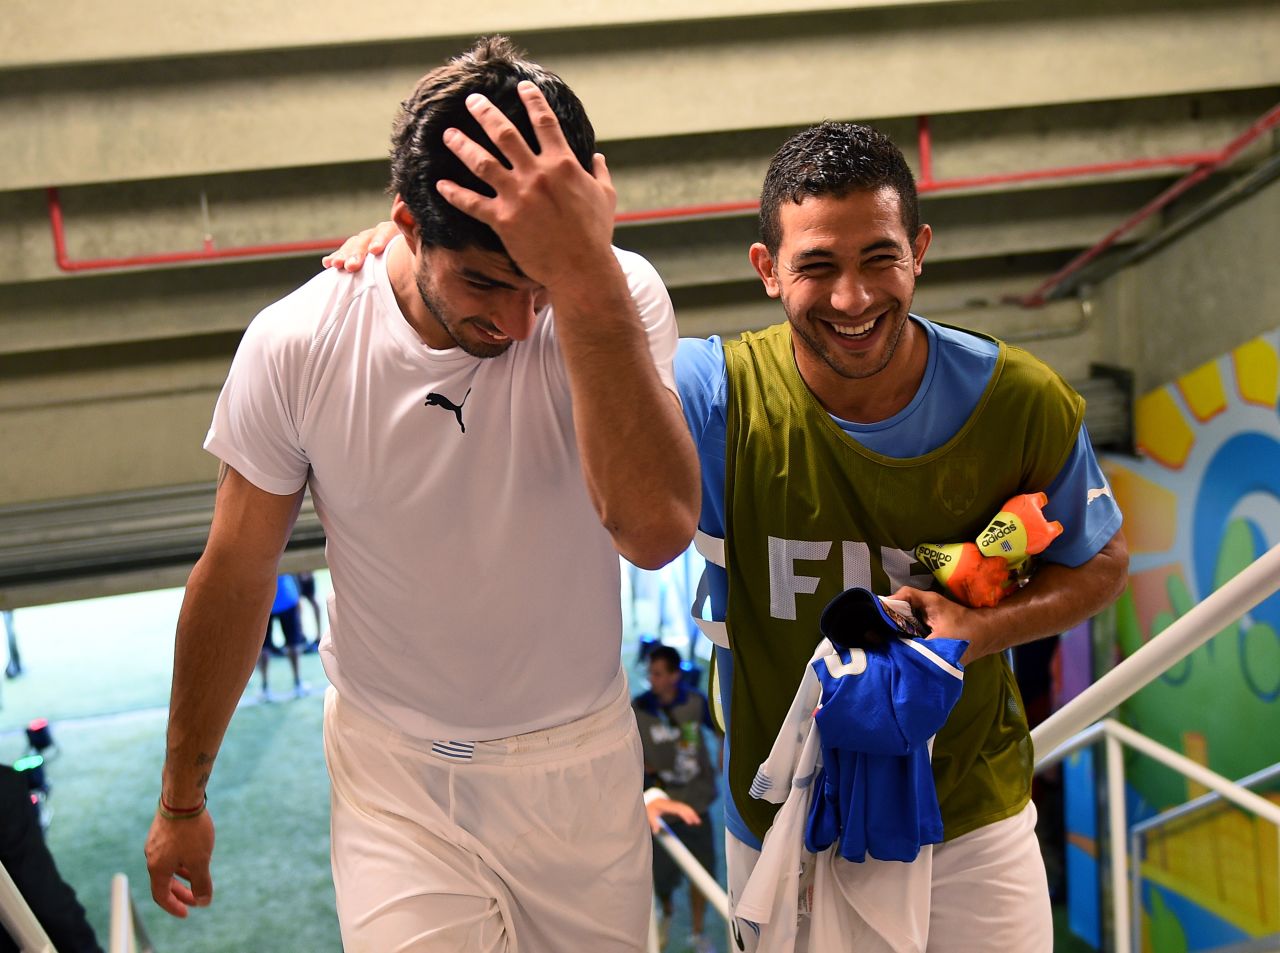 Suarez, left, celebrates the 1-0 win against Italy with his teammate Walter Gargano in the tunnel after the controversial match at Estadio das Dunas.